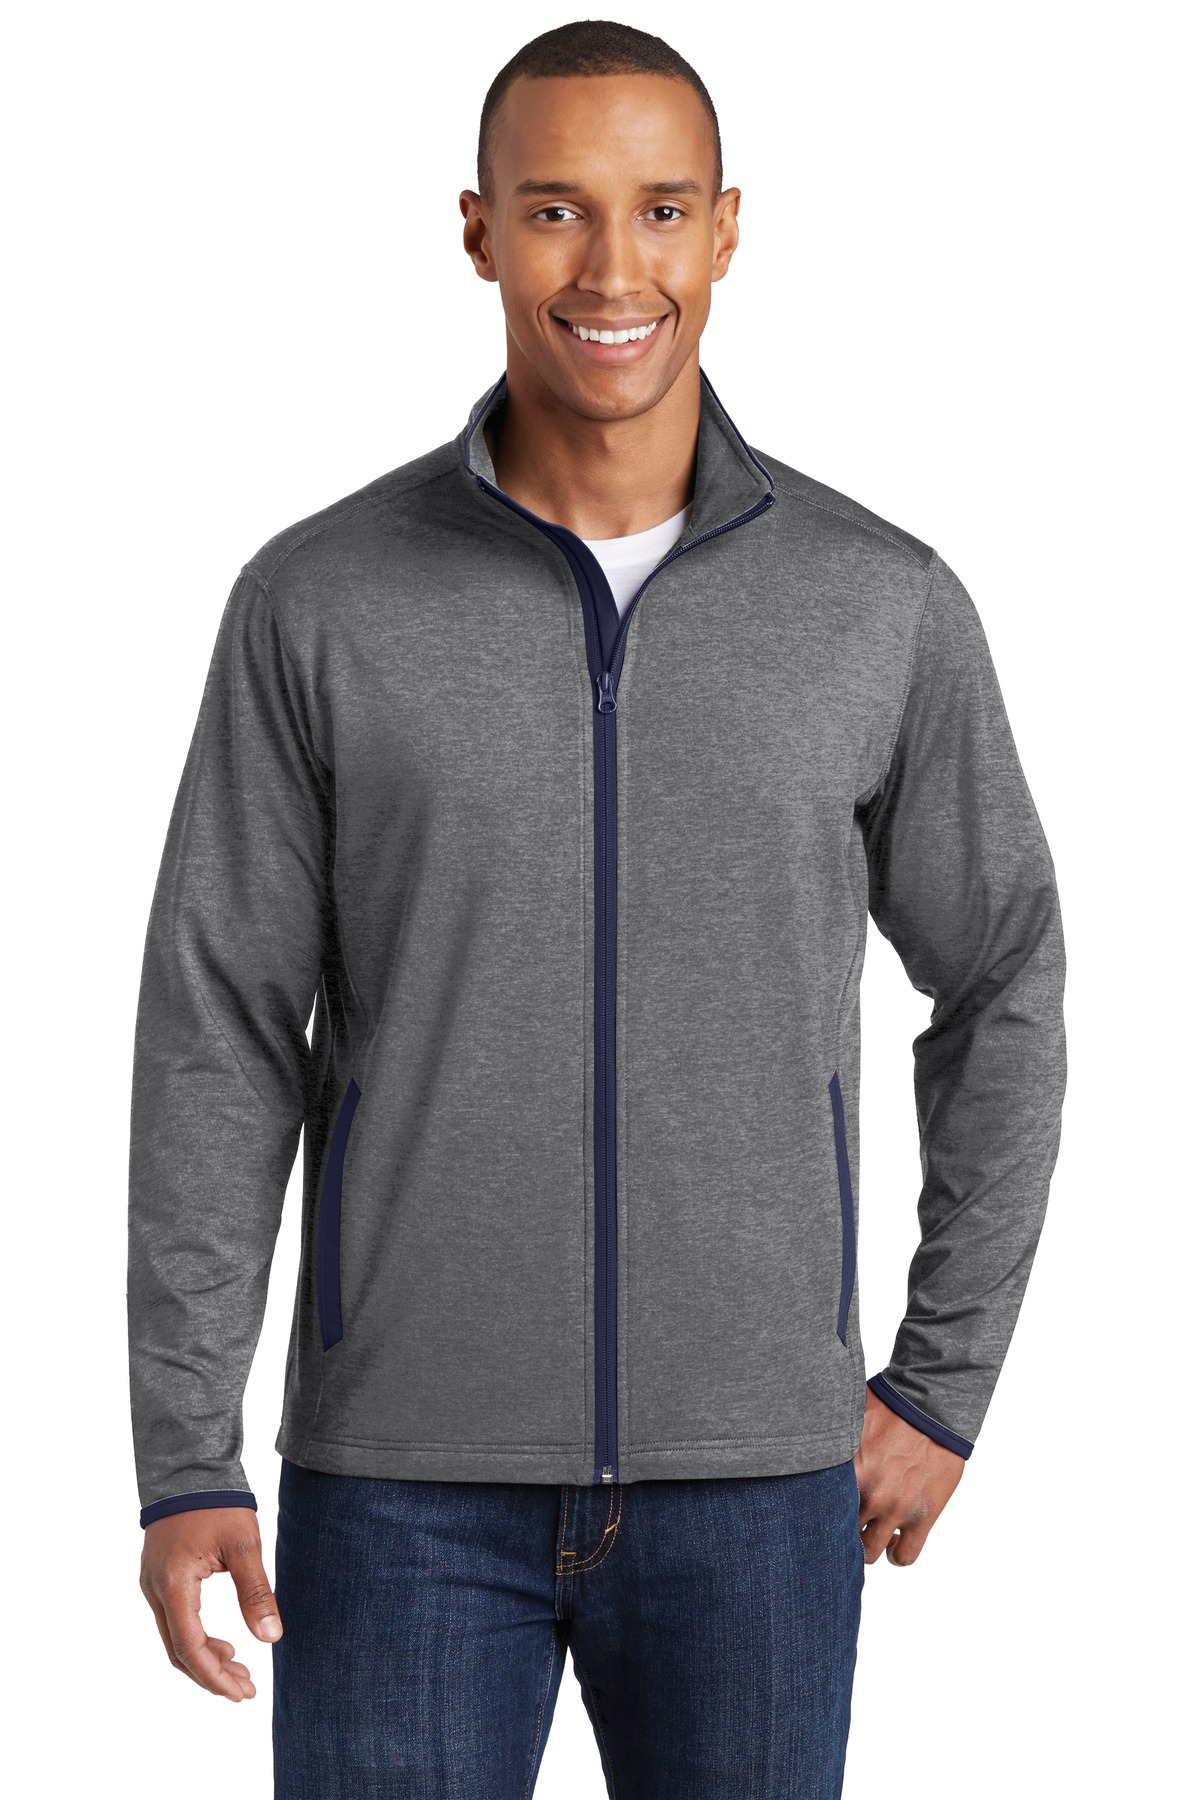 click to view Charcoal Grey Heather/ True Navy